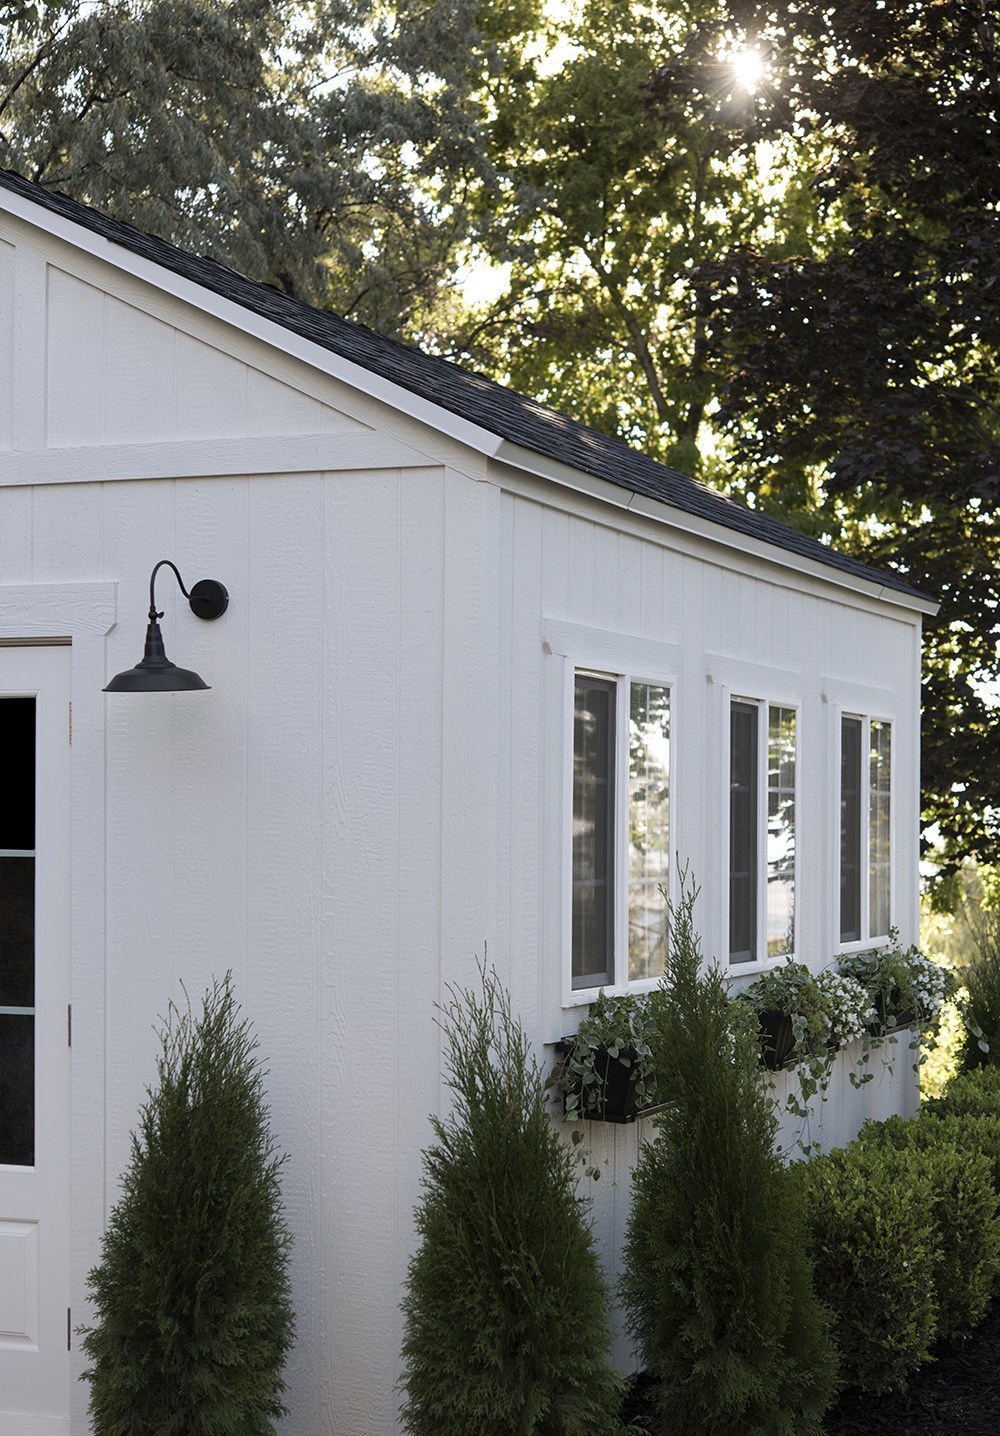 Nuance (Sherwin Williams) is name of white paint on this shed exterior with windows and window boxes - RoomforTuesday. #nurance #whitepaintcolors #exteriorcolors